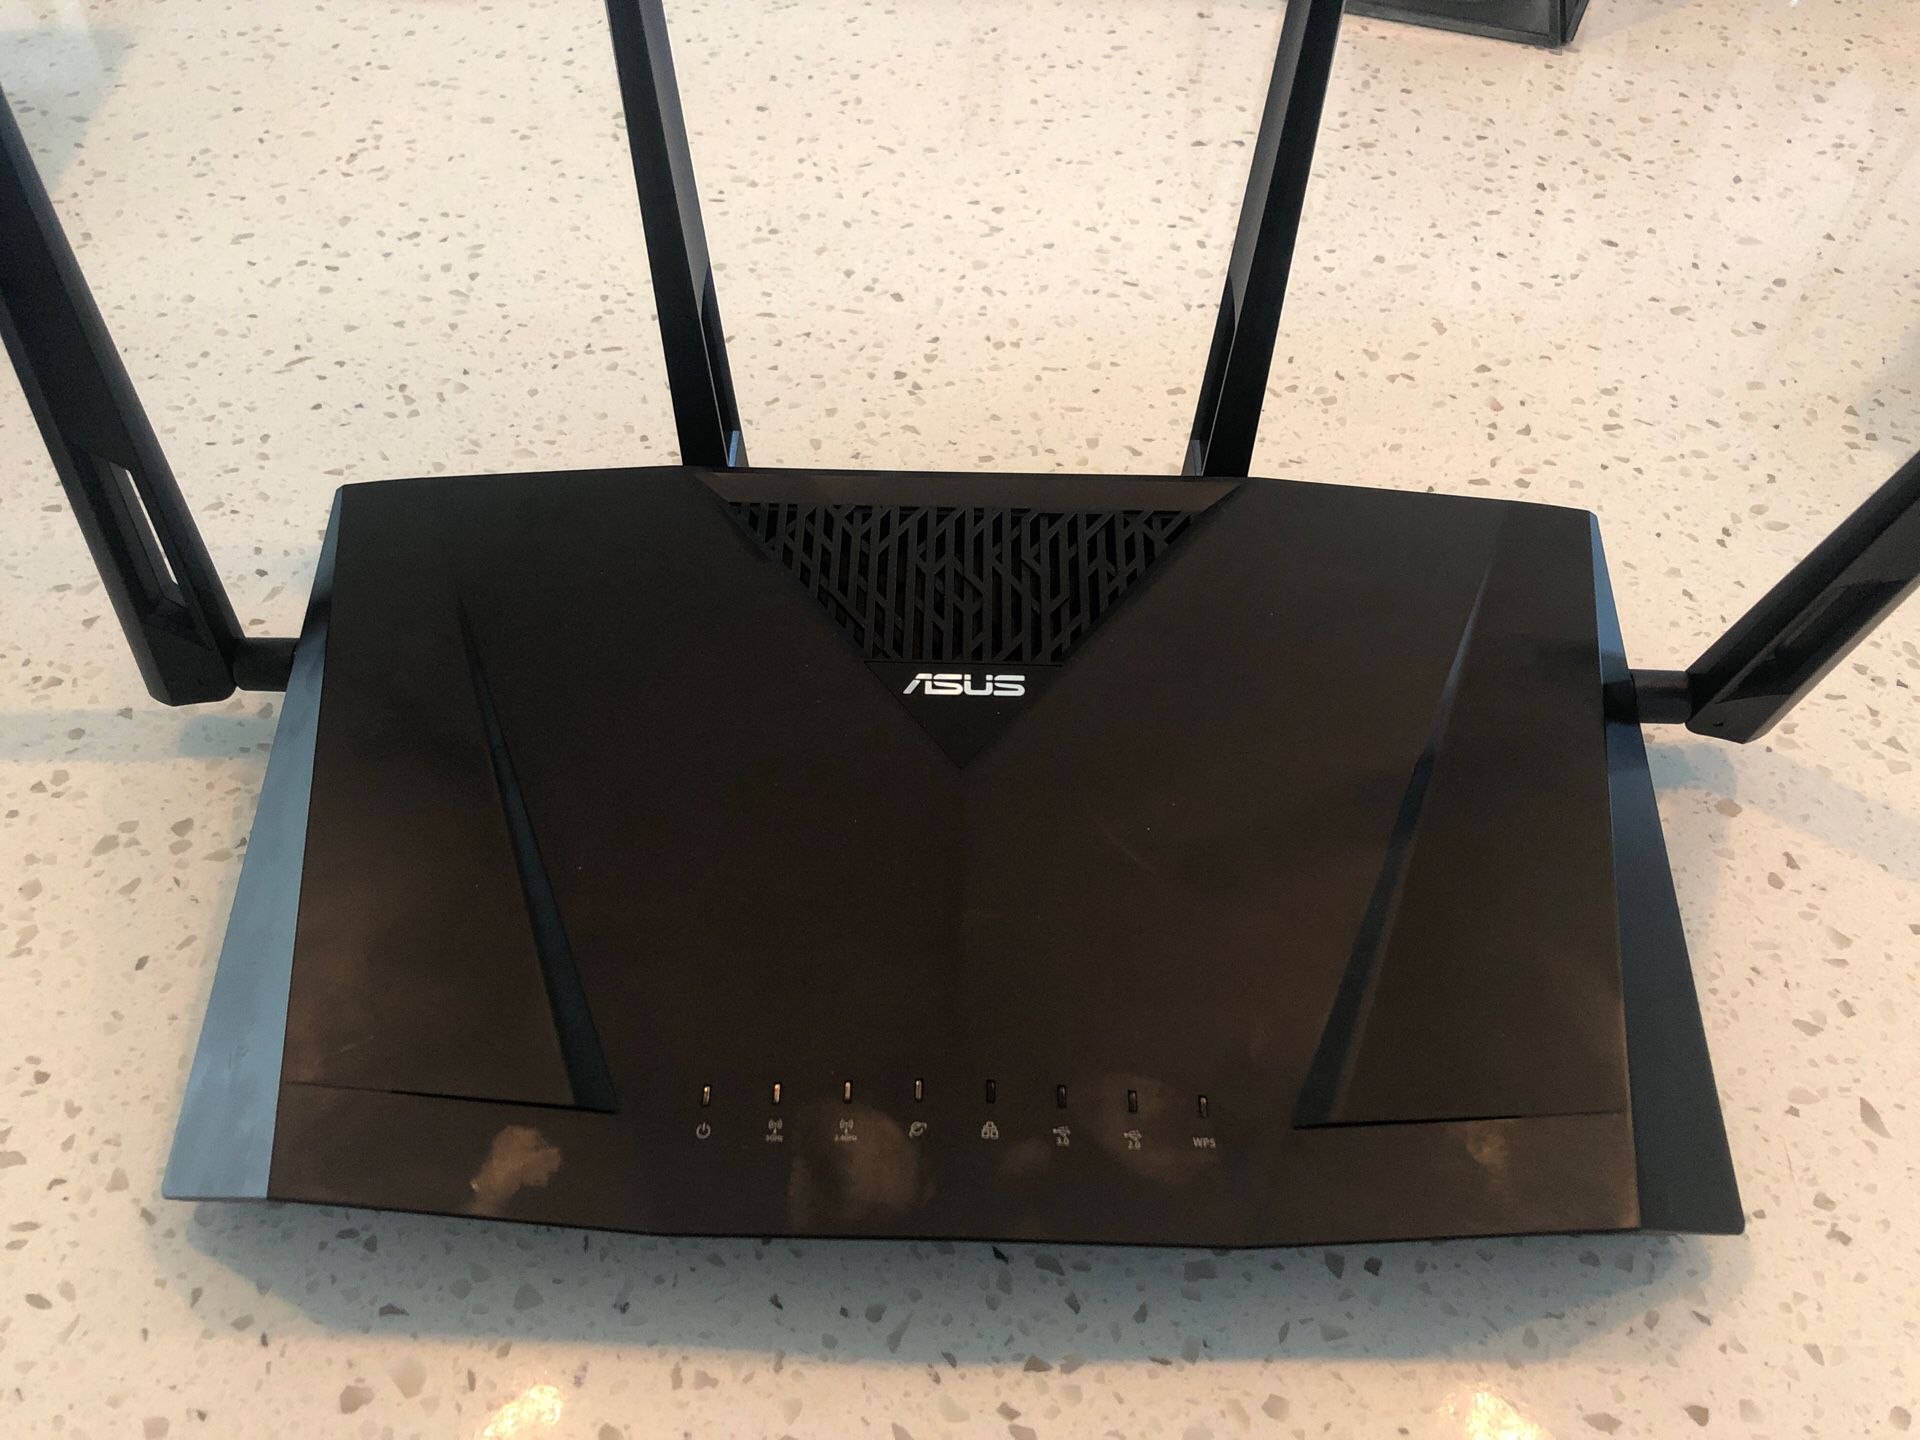 Asus AC3100 Wireless Dual Band Router